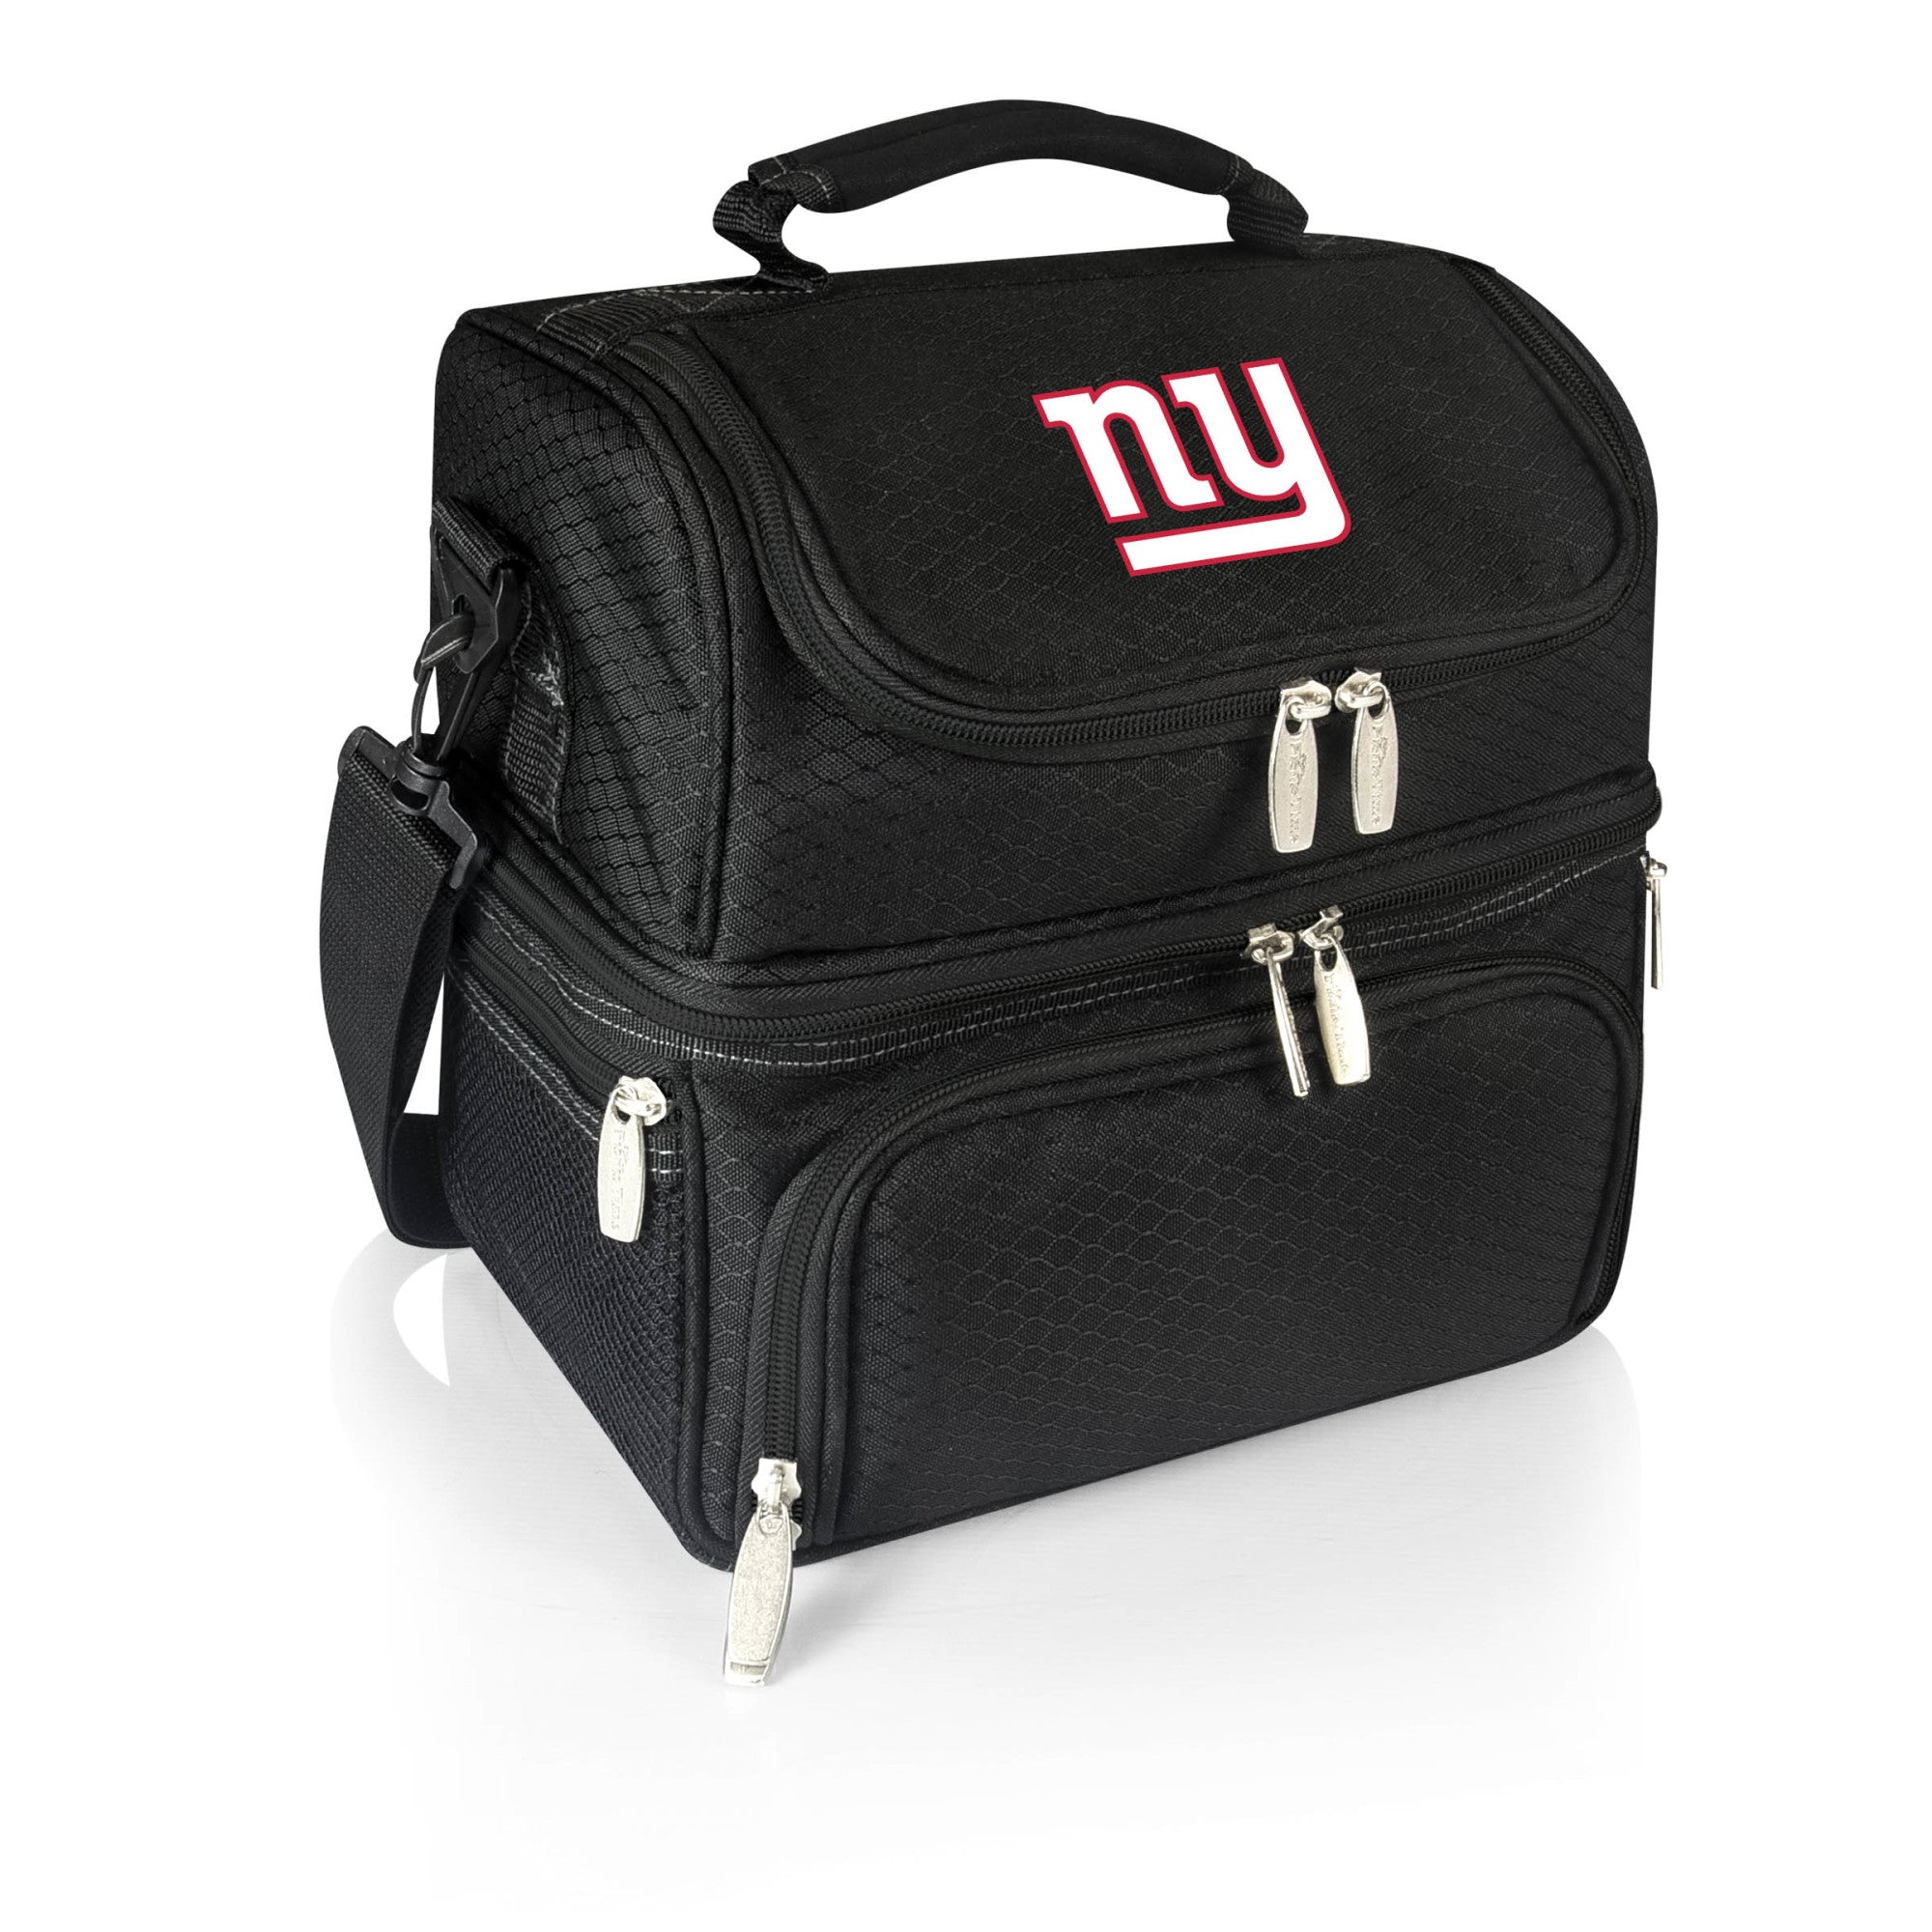 New York Giants - Pranzo Lunch Bag Cooler with Utensils